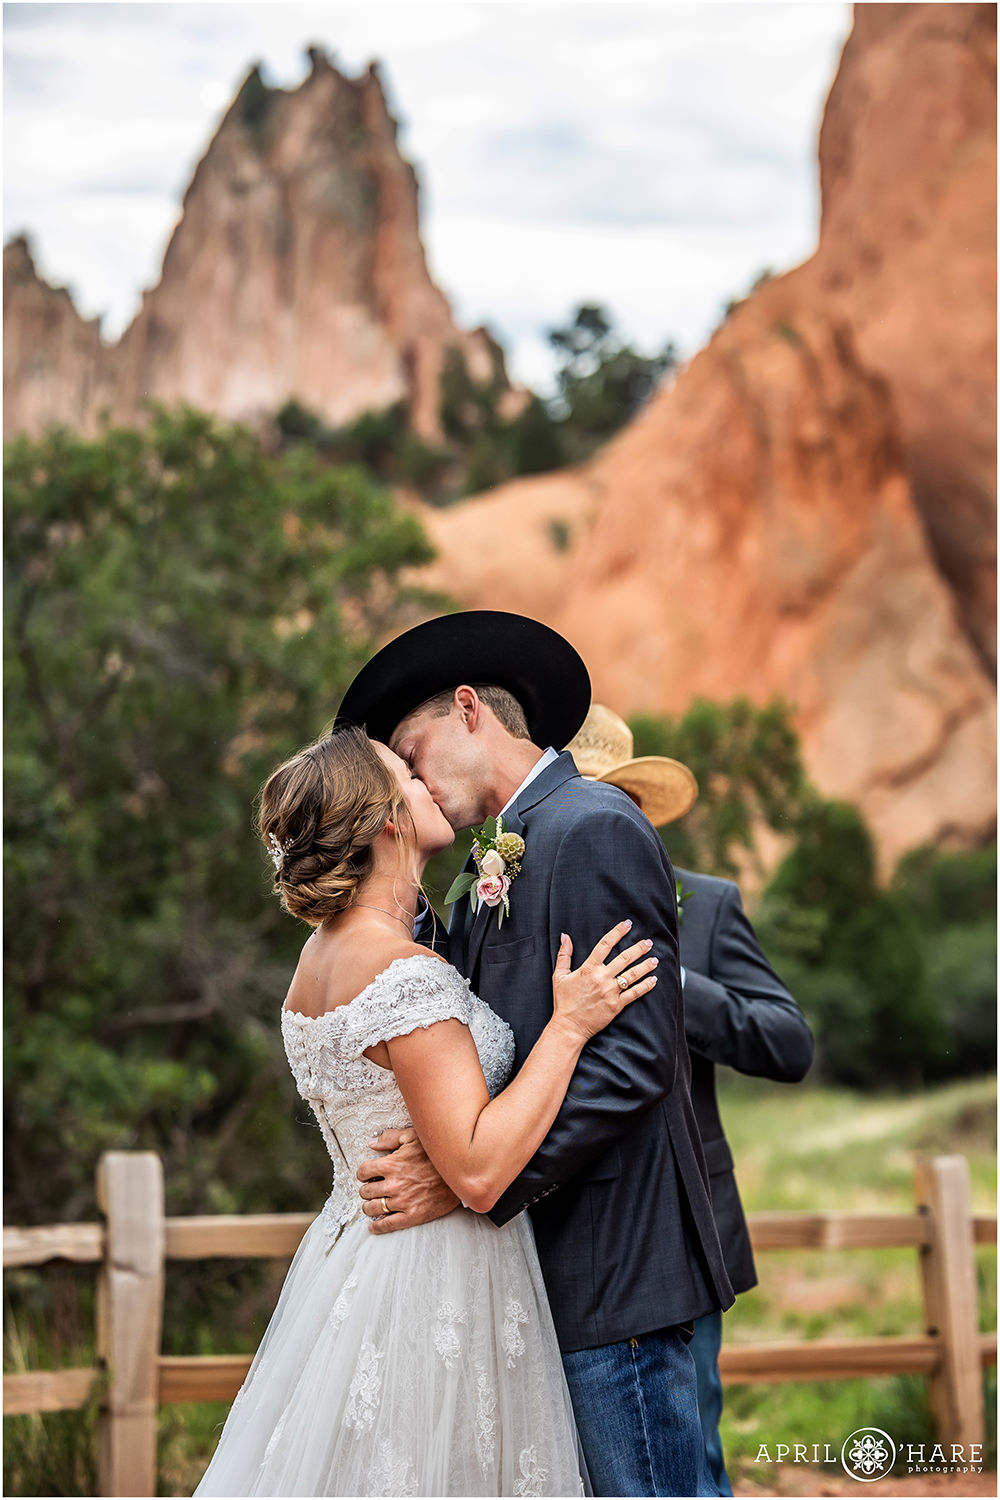 Bride and groom kiss at their wedding ceremony at Garden of the Gods